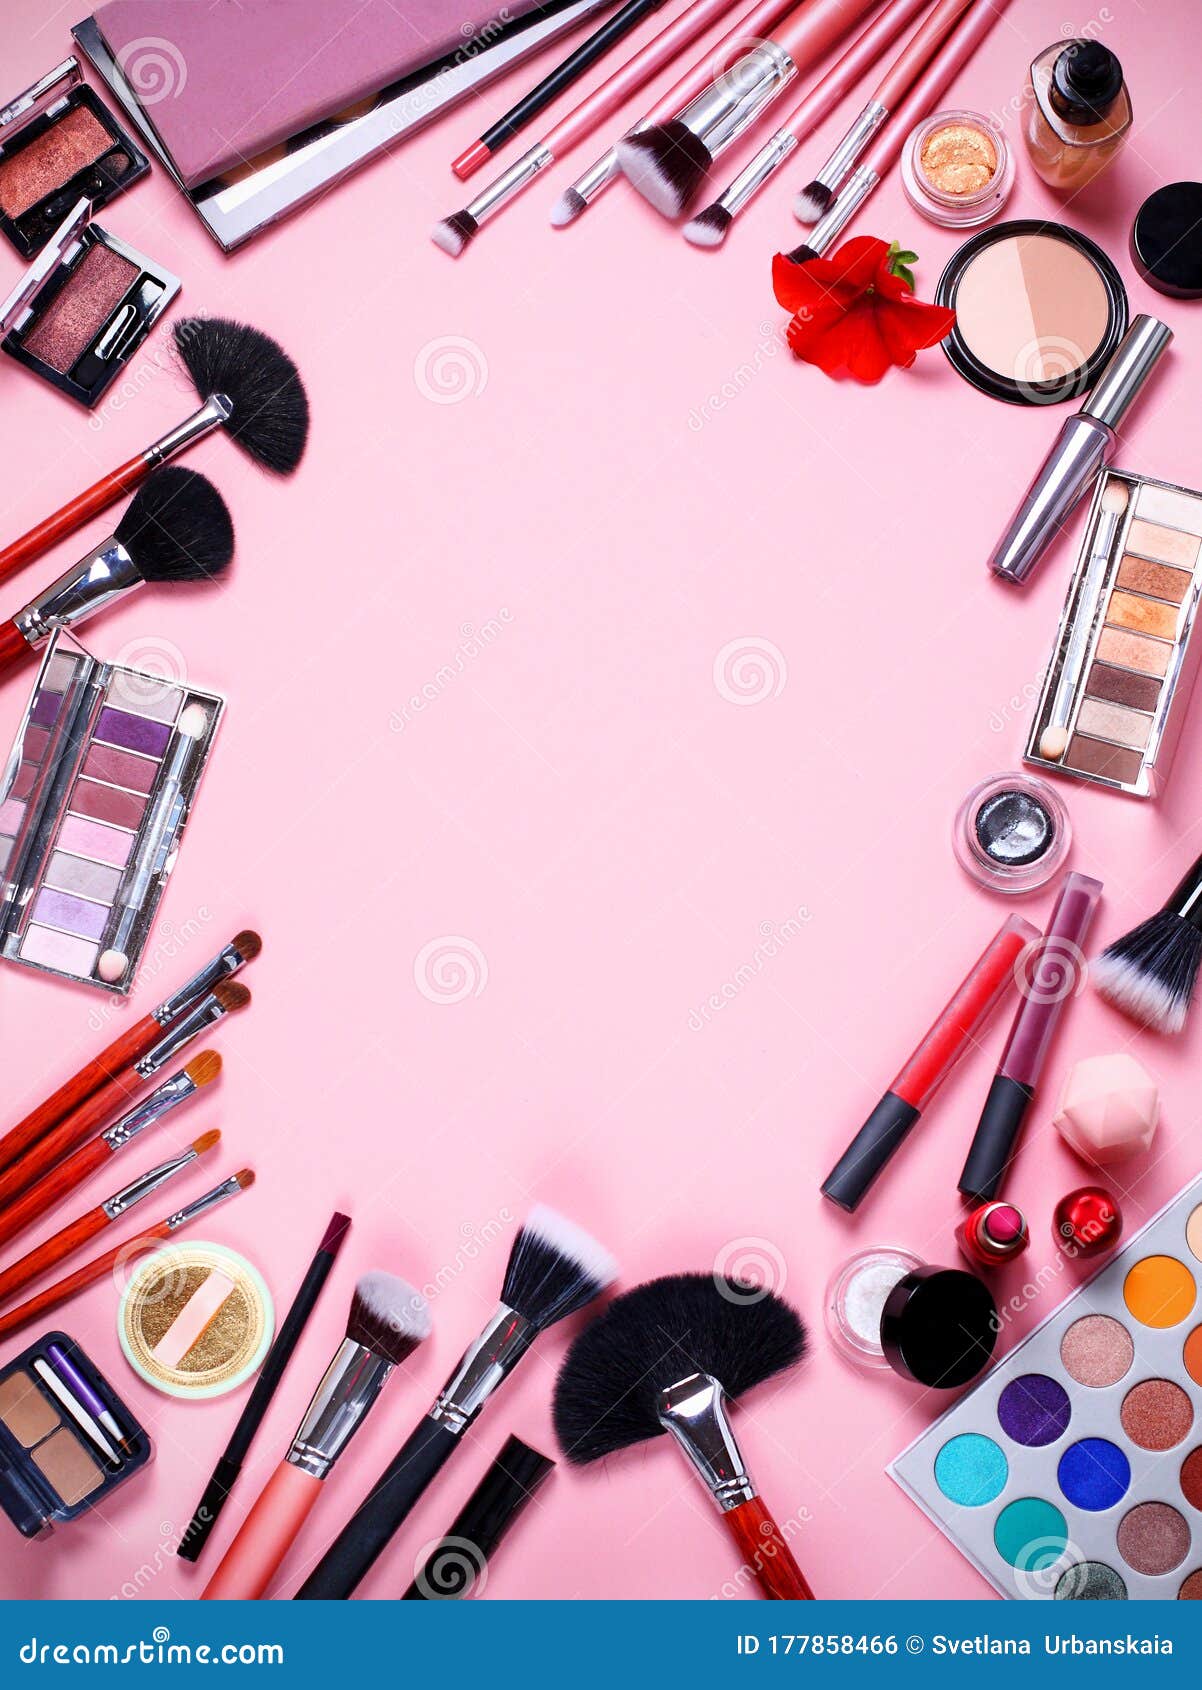 Cosmetics Background. Top View. Makeup Brushes and Cosmetics on a